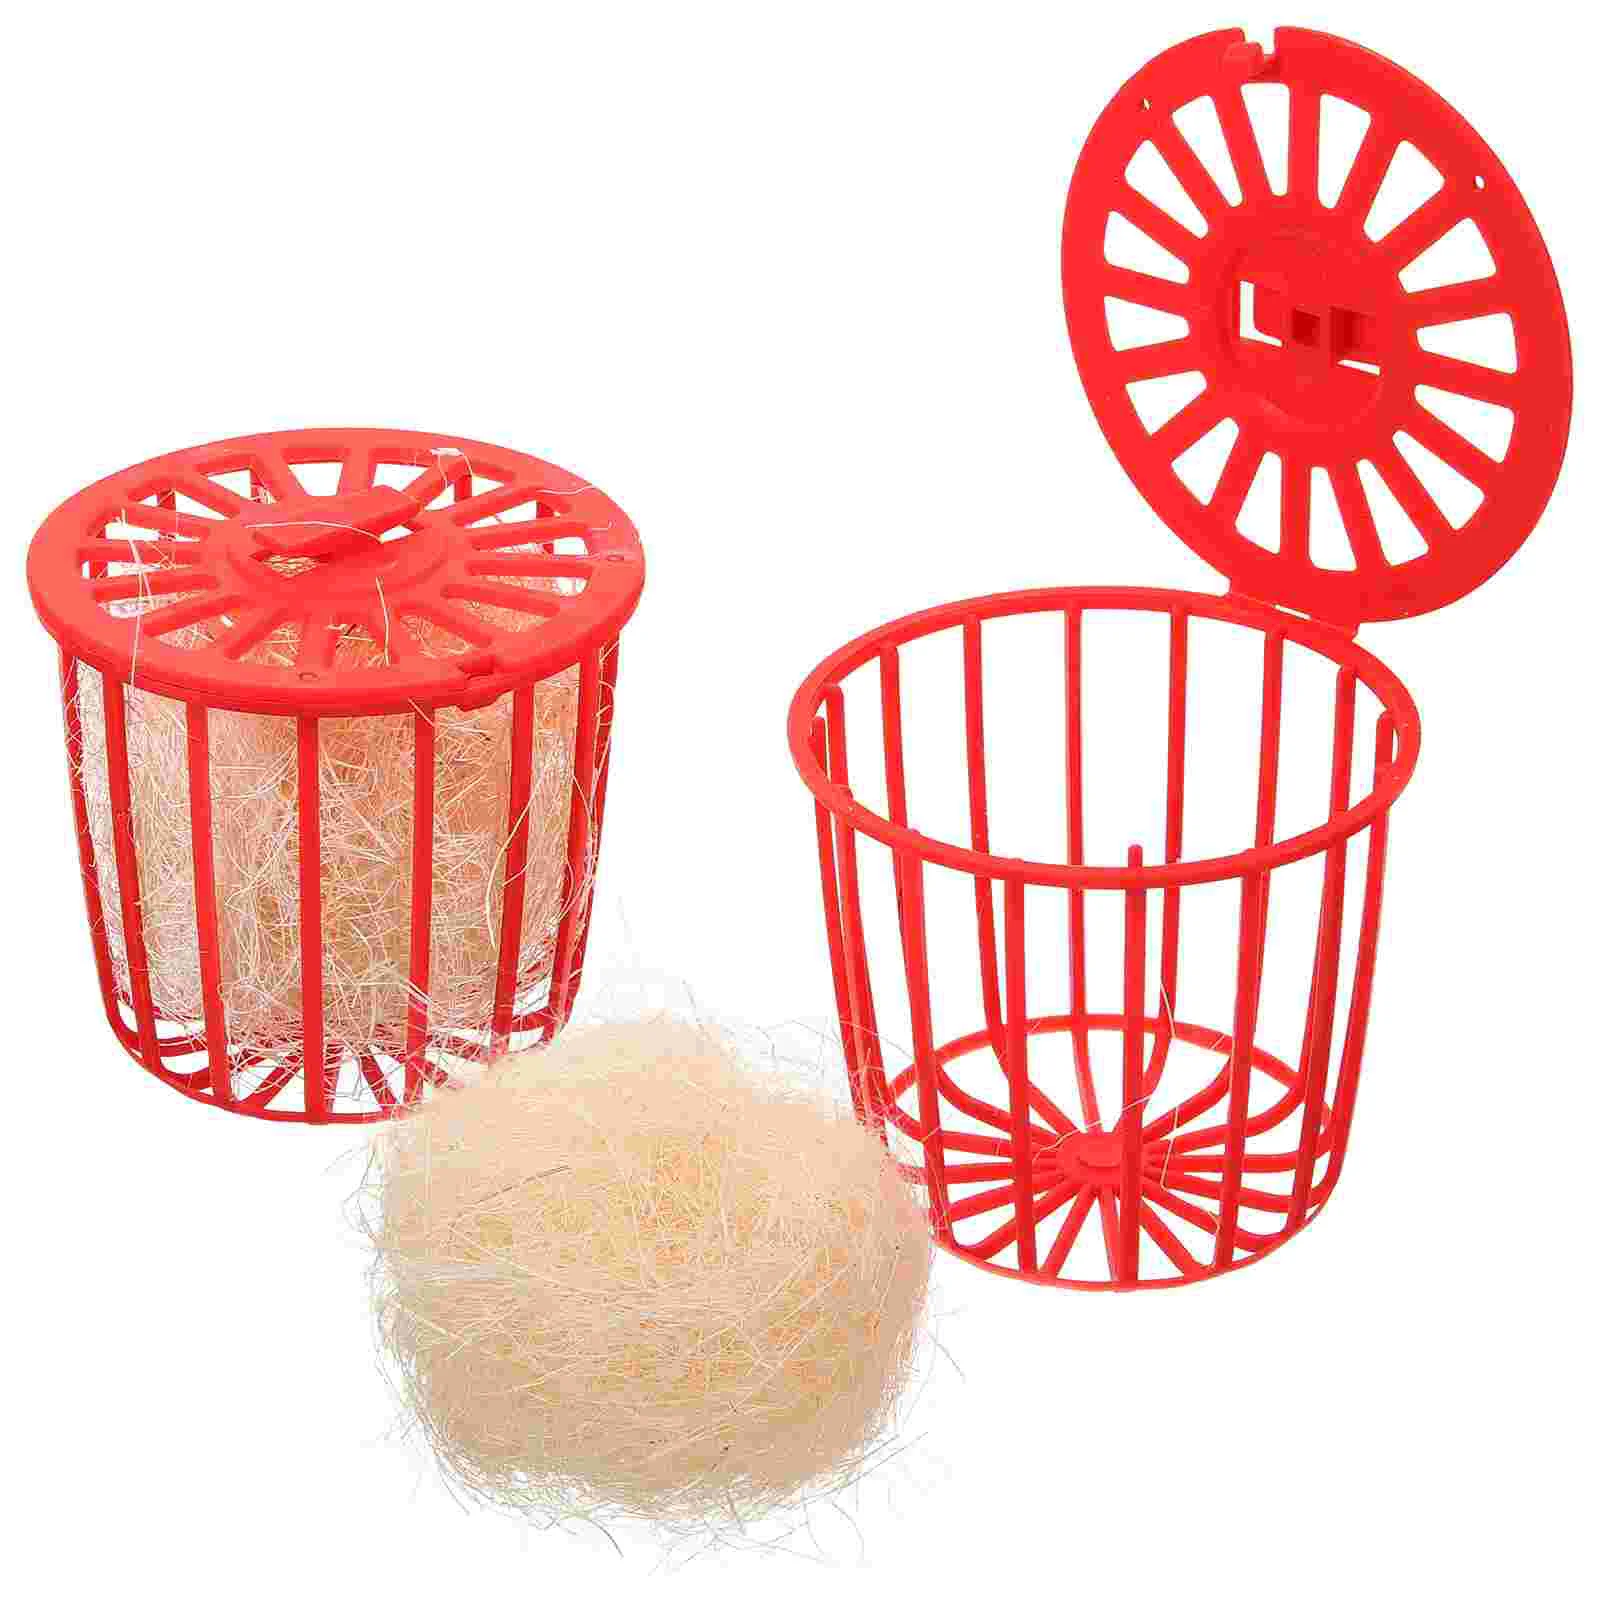 2 Pcs Bird Cage Bird's Nest Nests for Cages Basket Canary Bedding Pigeon Bowl